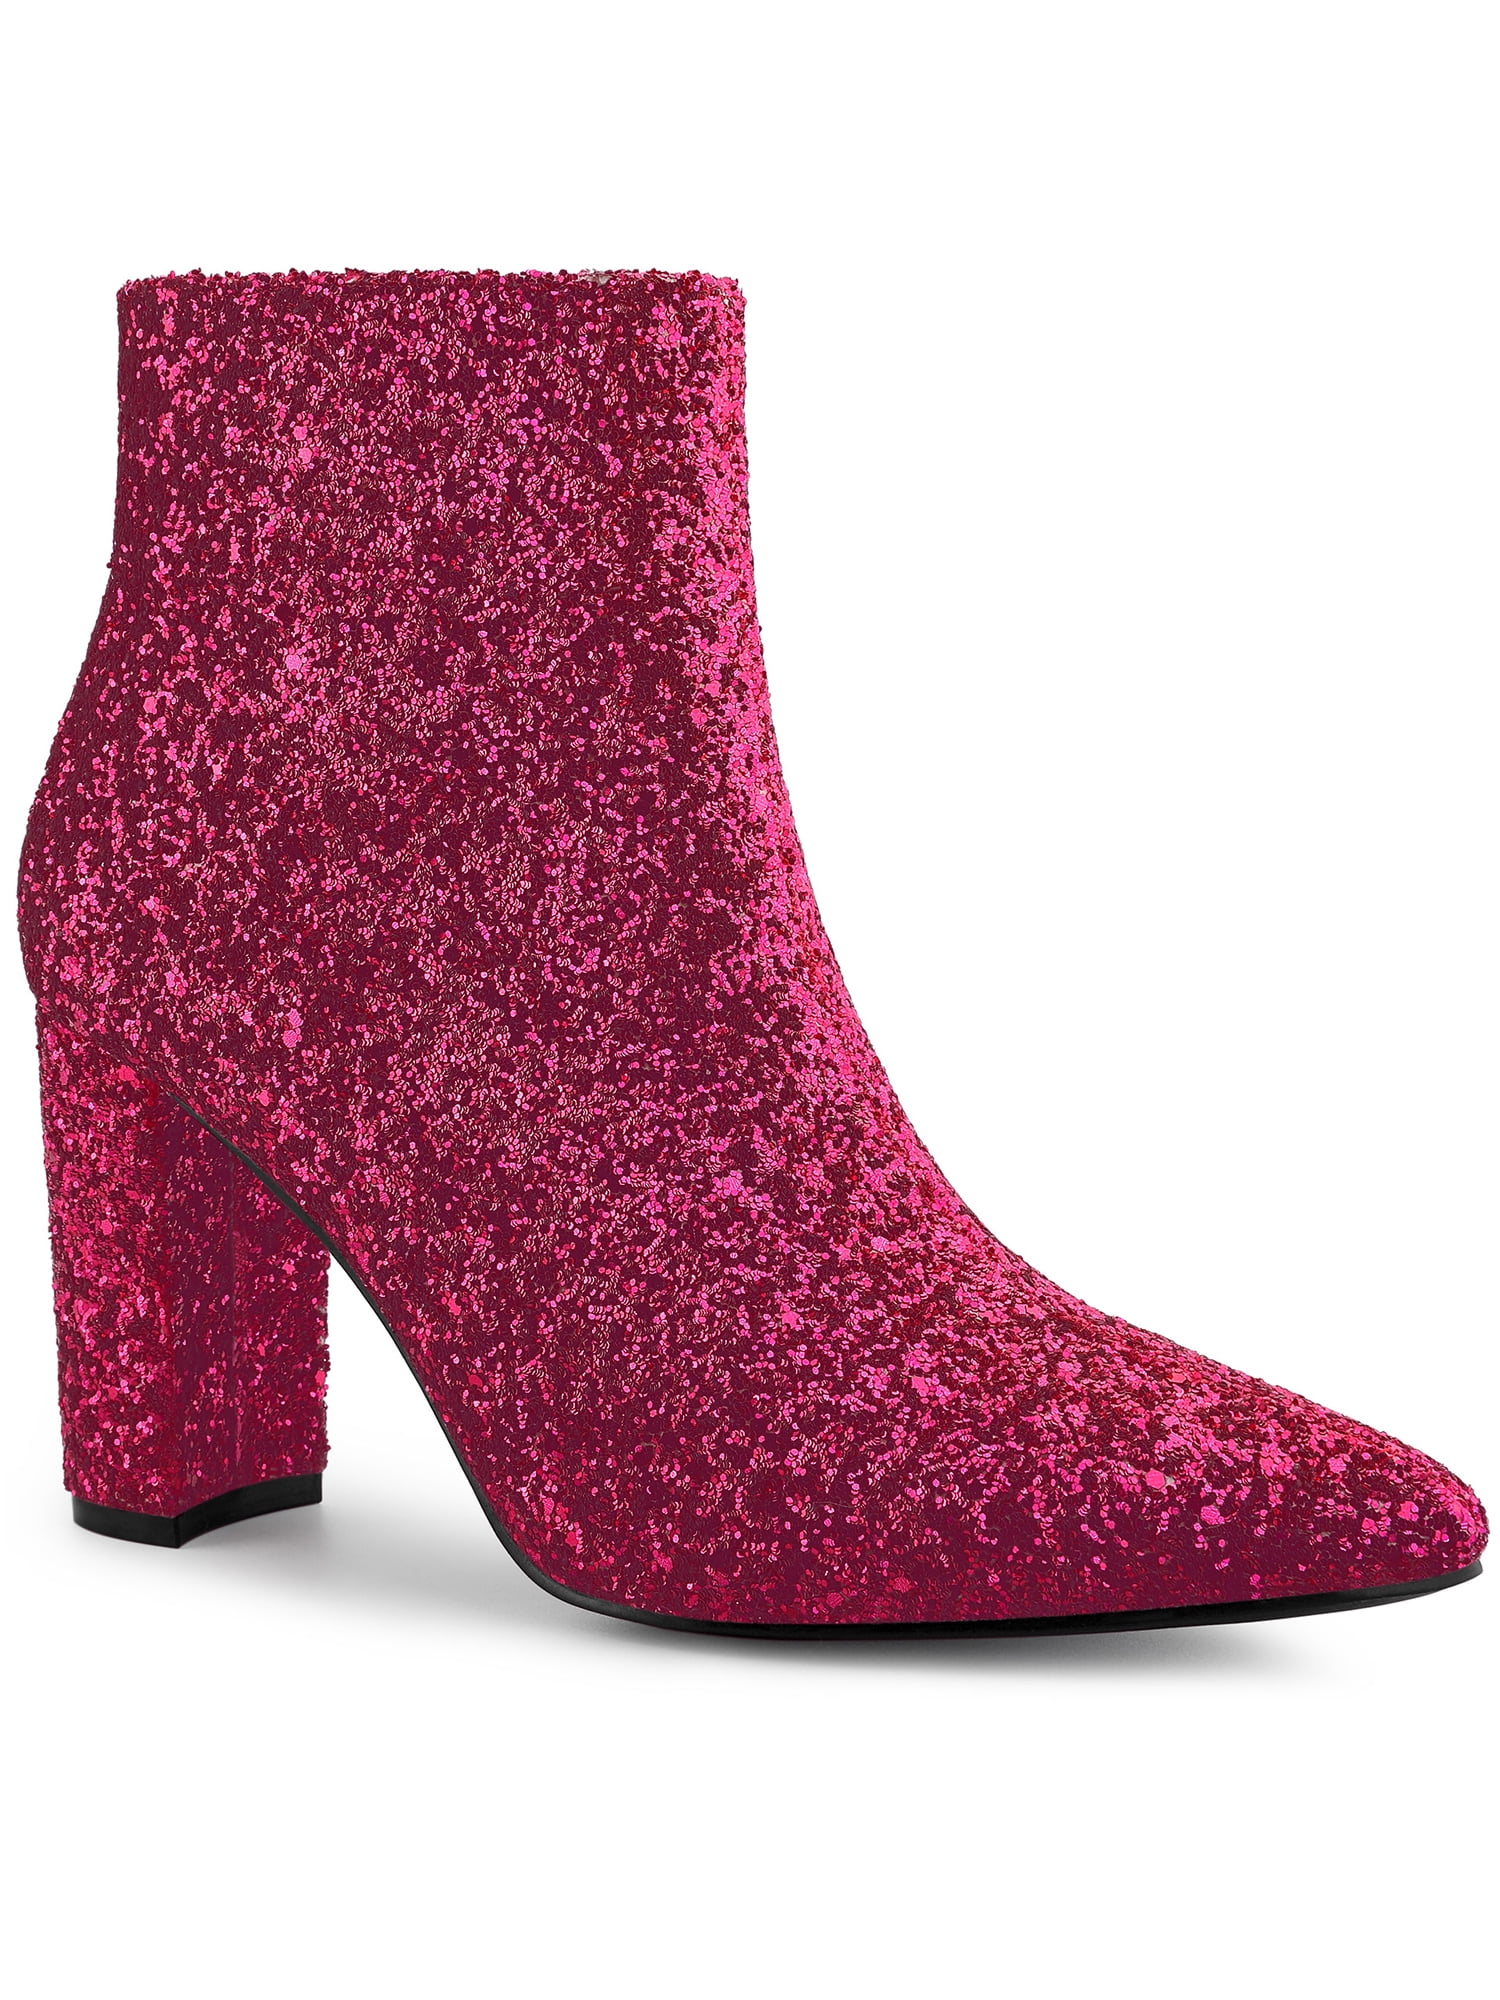 75mm Women's Zipper Pointed Toe Red Bottom Chunky Heel Ankle Glitter Boots